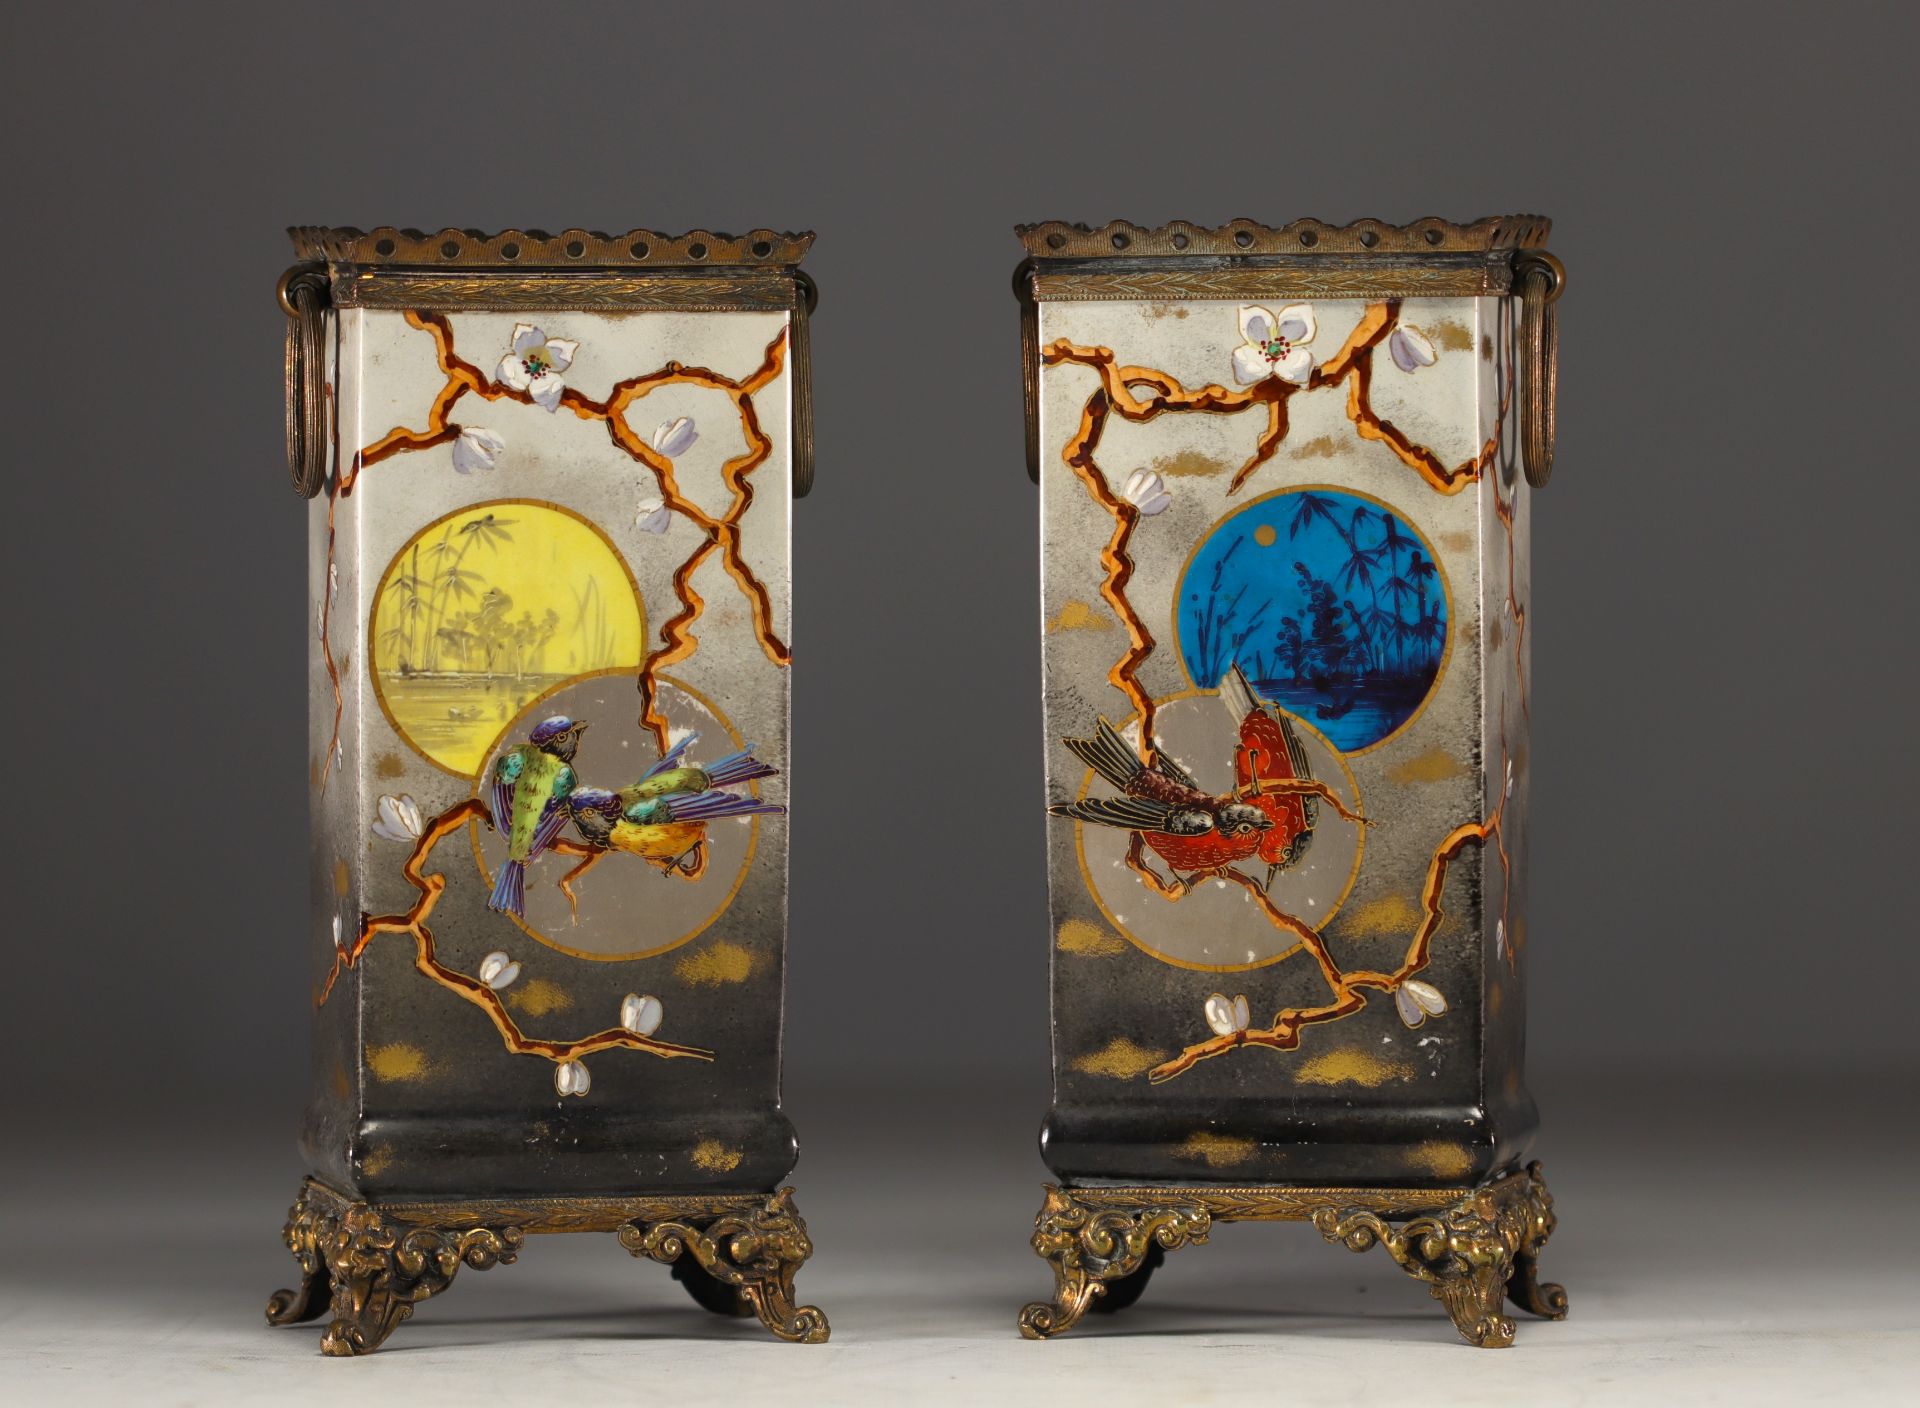 A pair of "Japanese inspired" earthenware vases with bronze mounts, French work from the Napoleon II